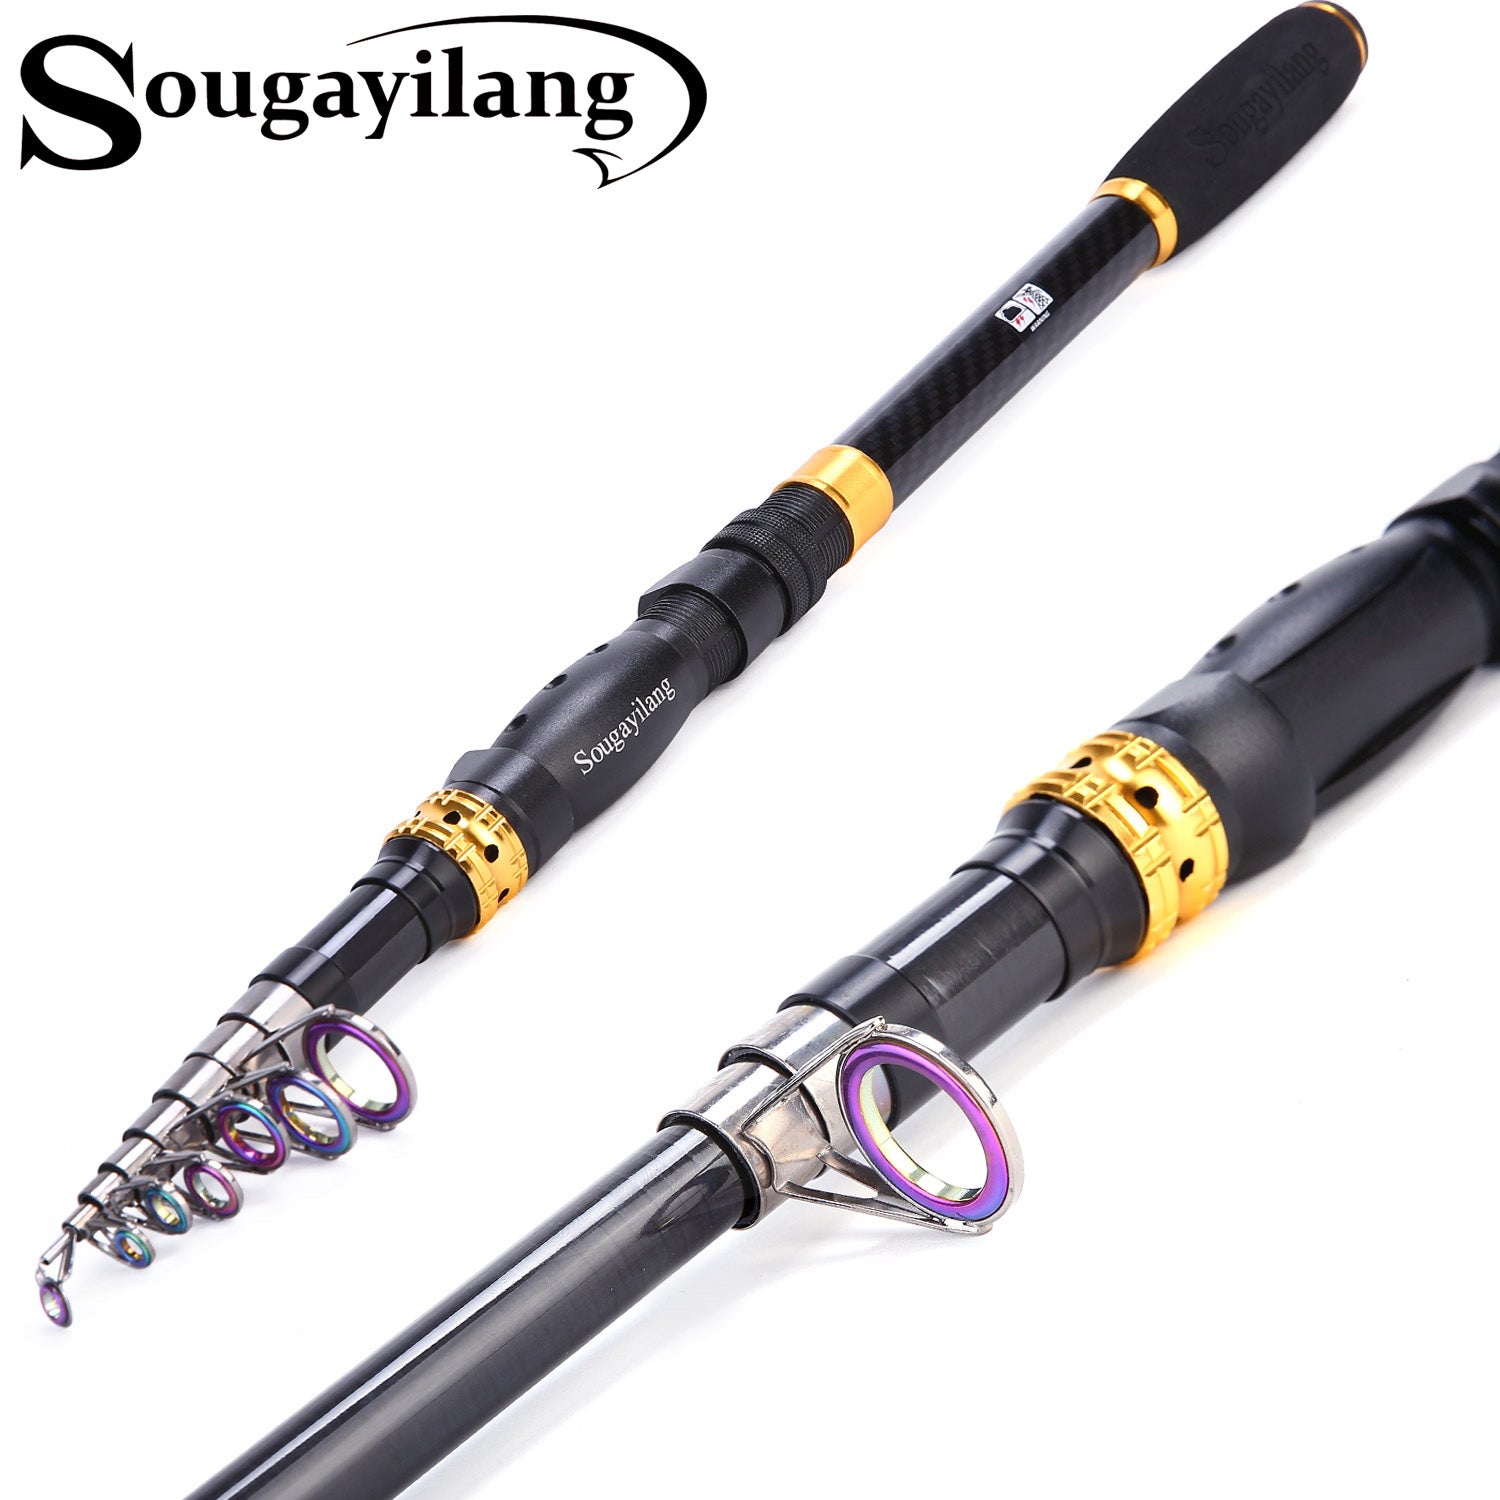 SlimpleStudio fishing rod Ultra Short Fishing Rod Pole Telescopic Smooth  Guide Ring Anti-slip Handle Portable for Anglers-2.3m Fishing Pole (Size 